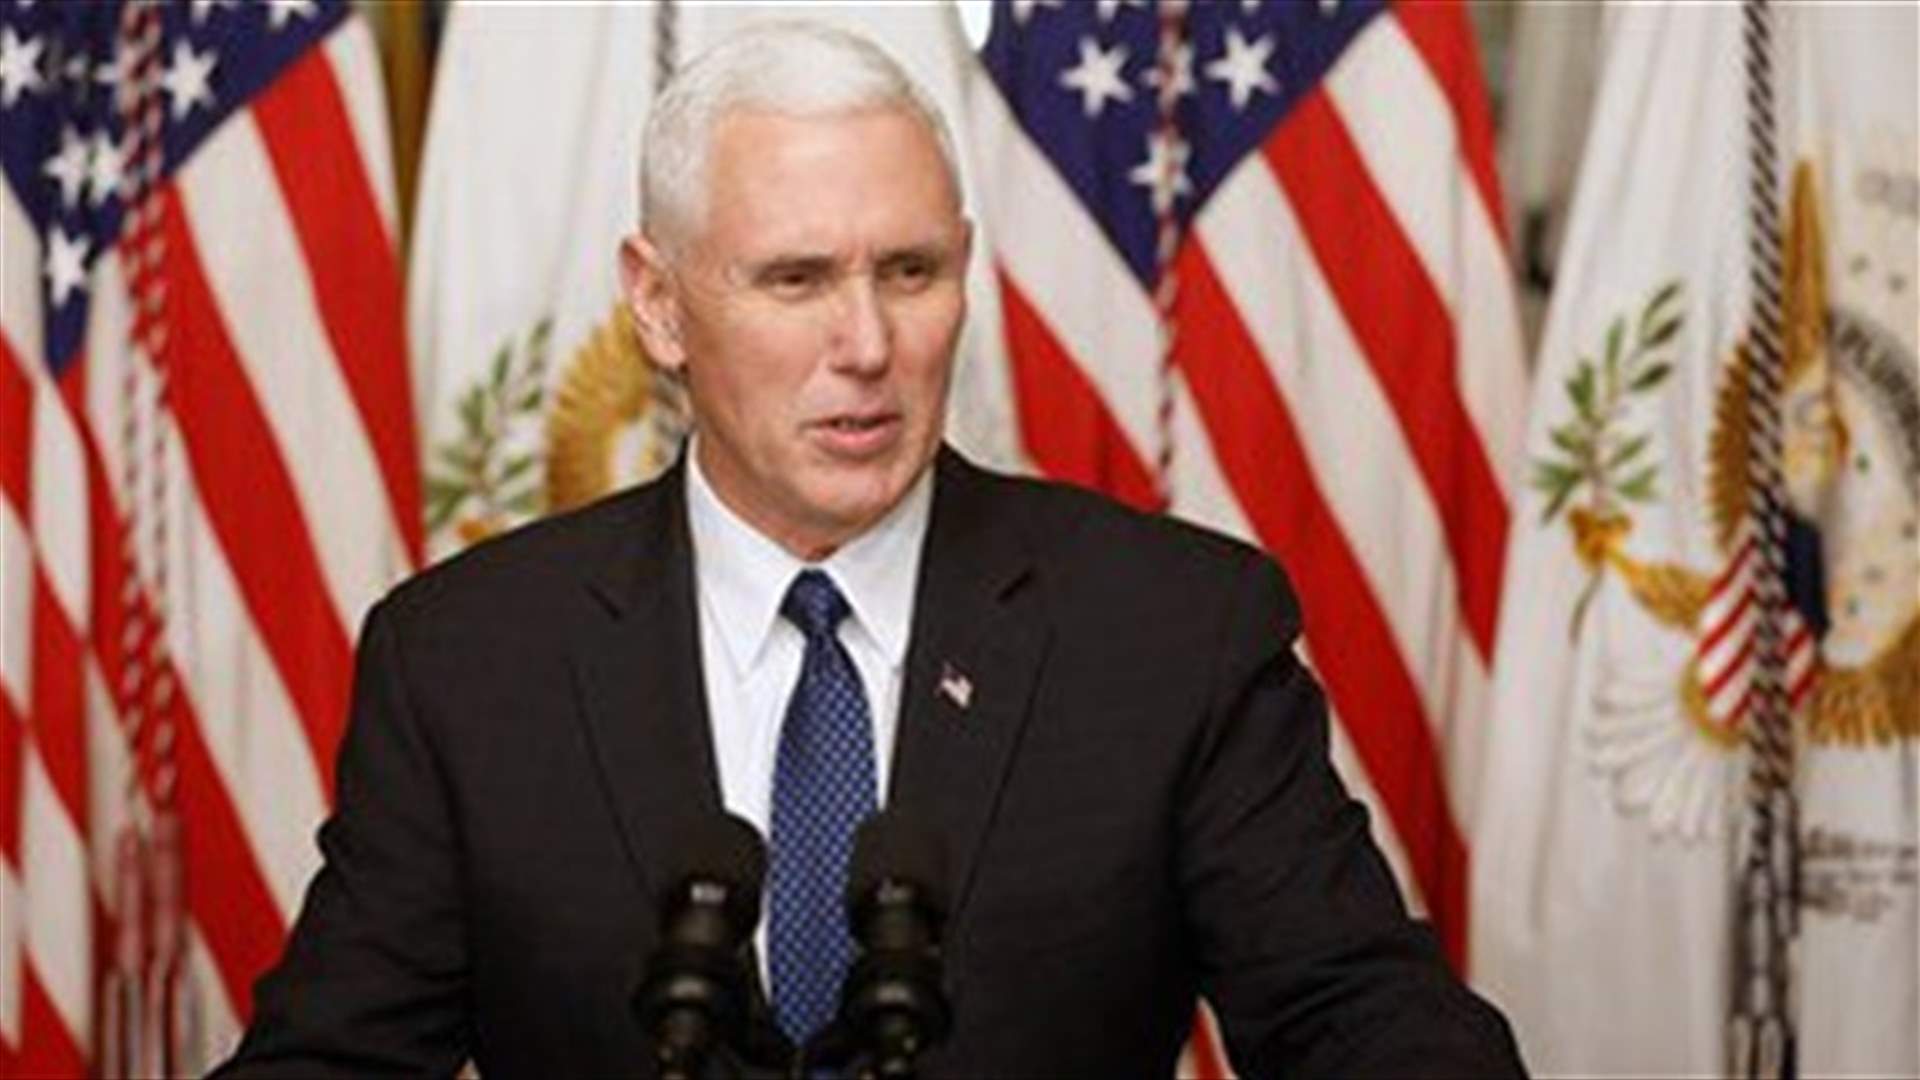 US weighing best response to Saudi oil attacks - Pence